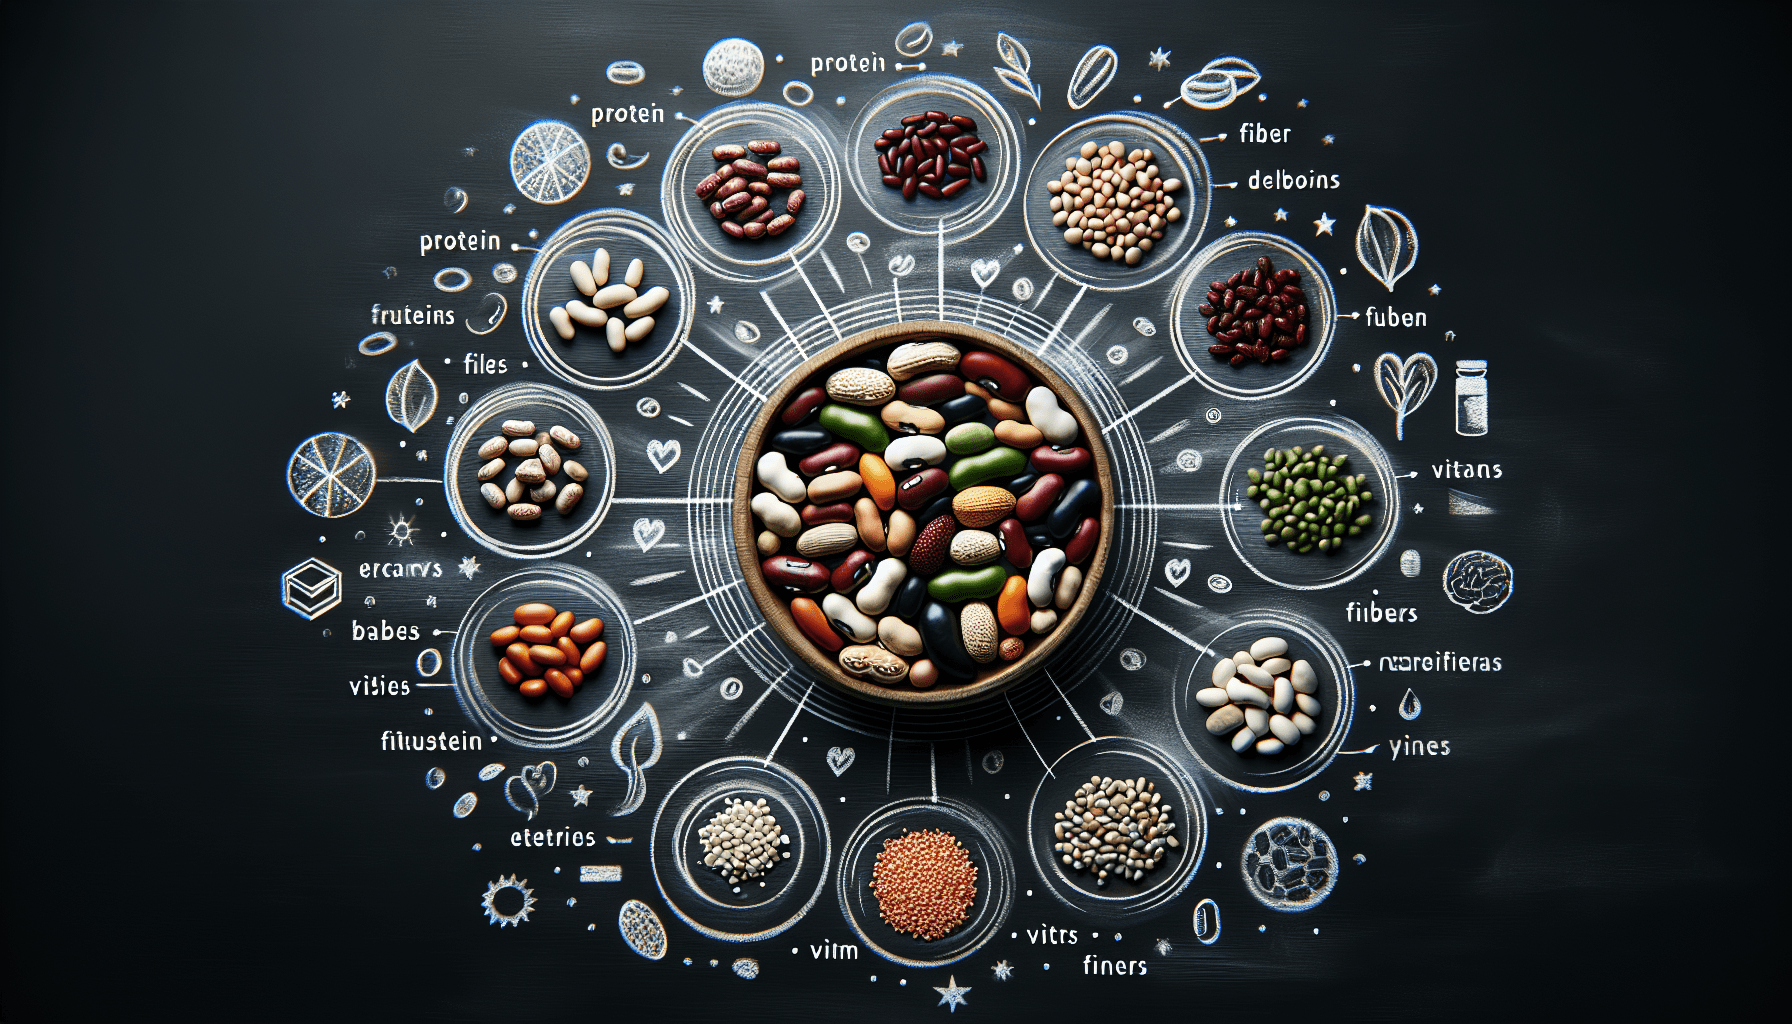 1 what nutritional benefits do beans provide